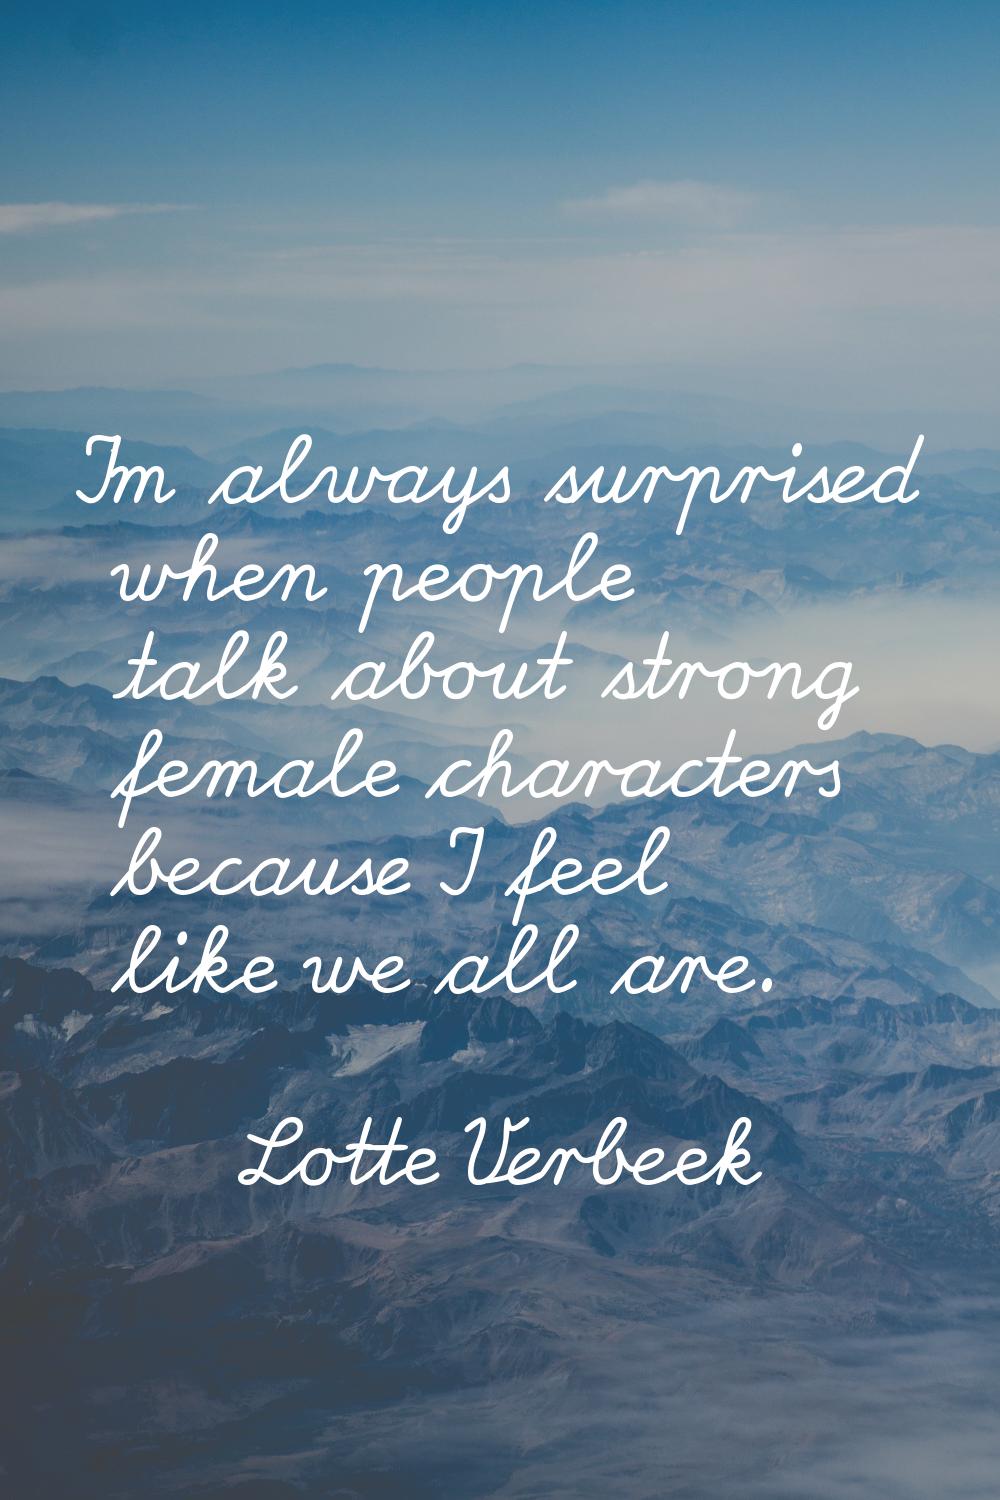 I'm always surprised when people talk about strong female characters because I feel like we all are